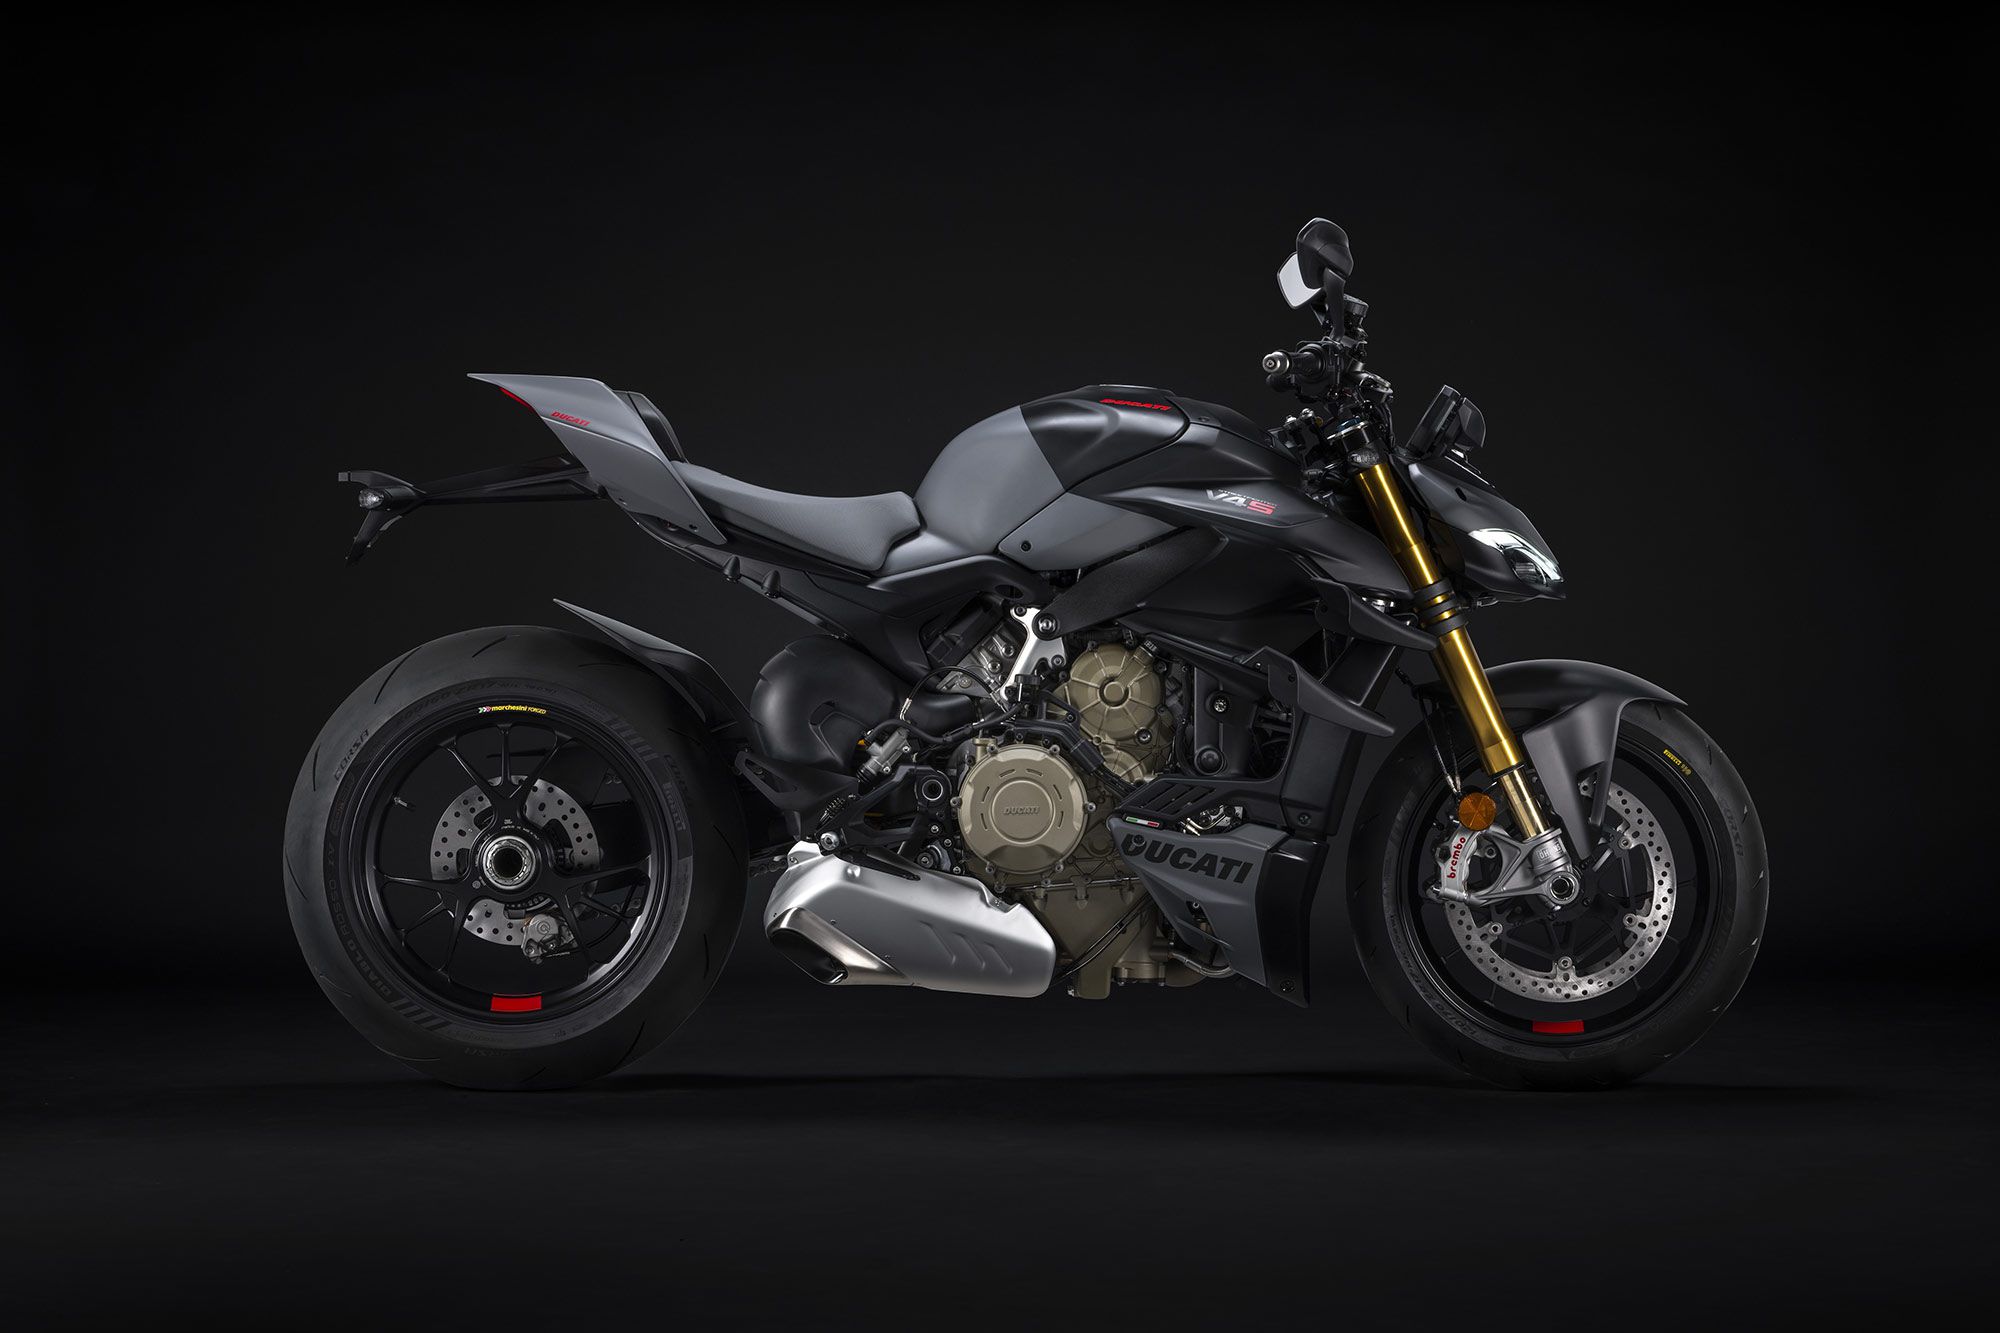 The Ducati Streetfighter V4 S in Grey and Nero livery.